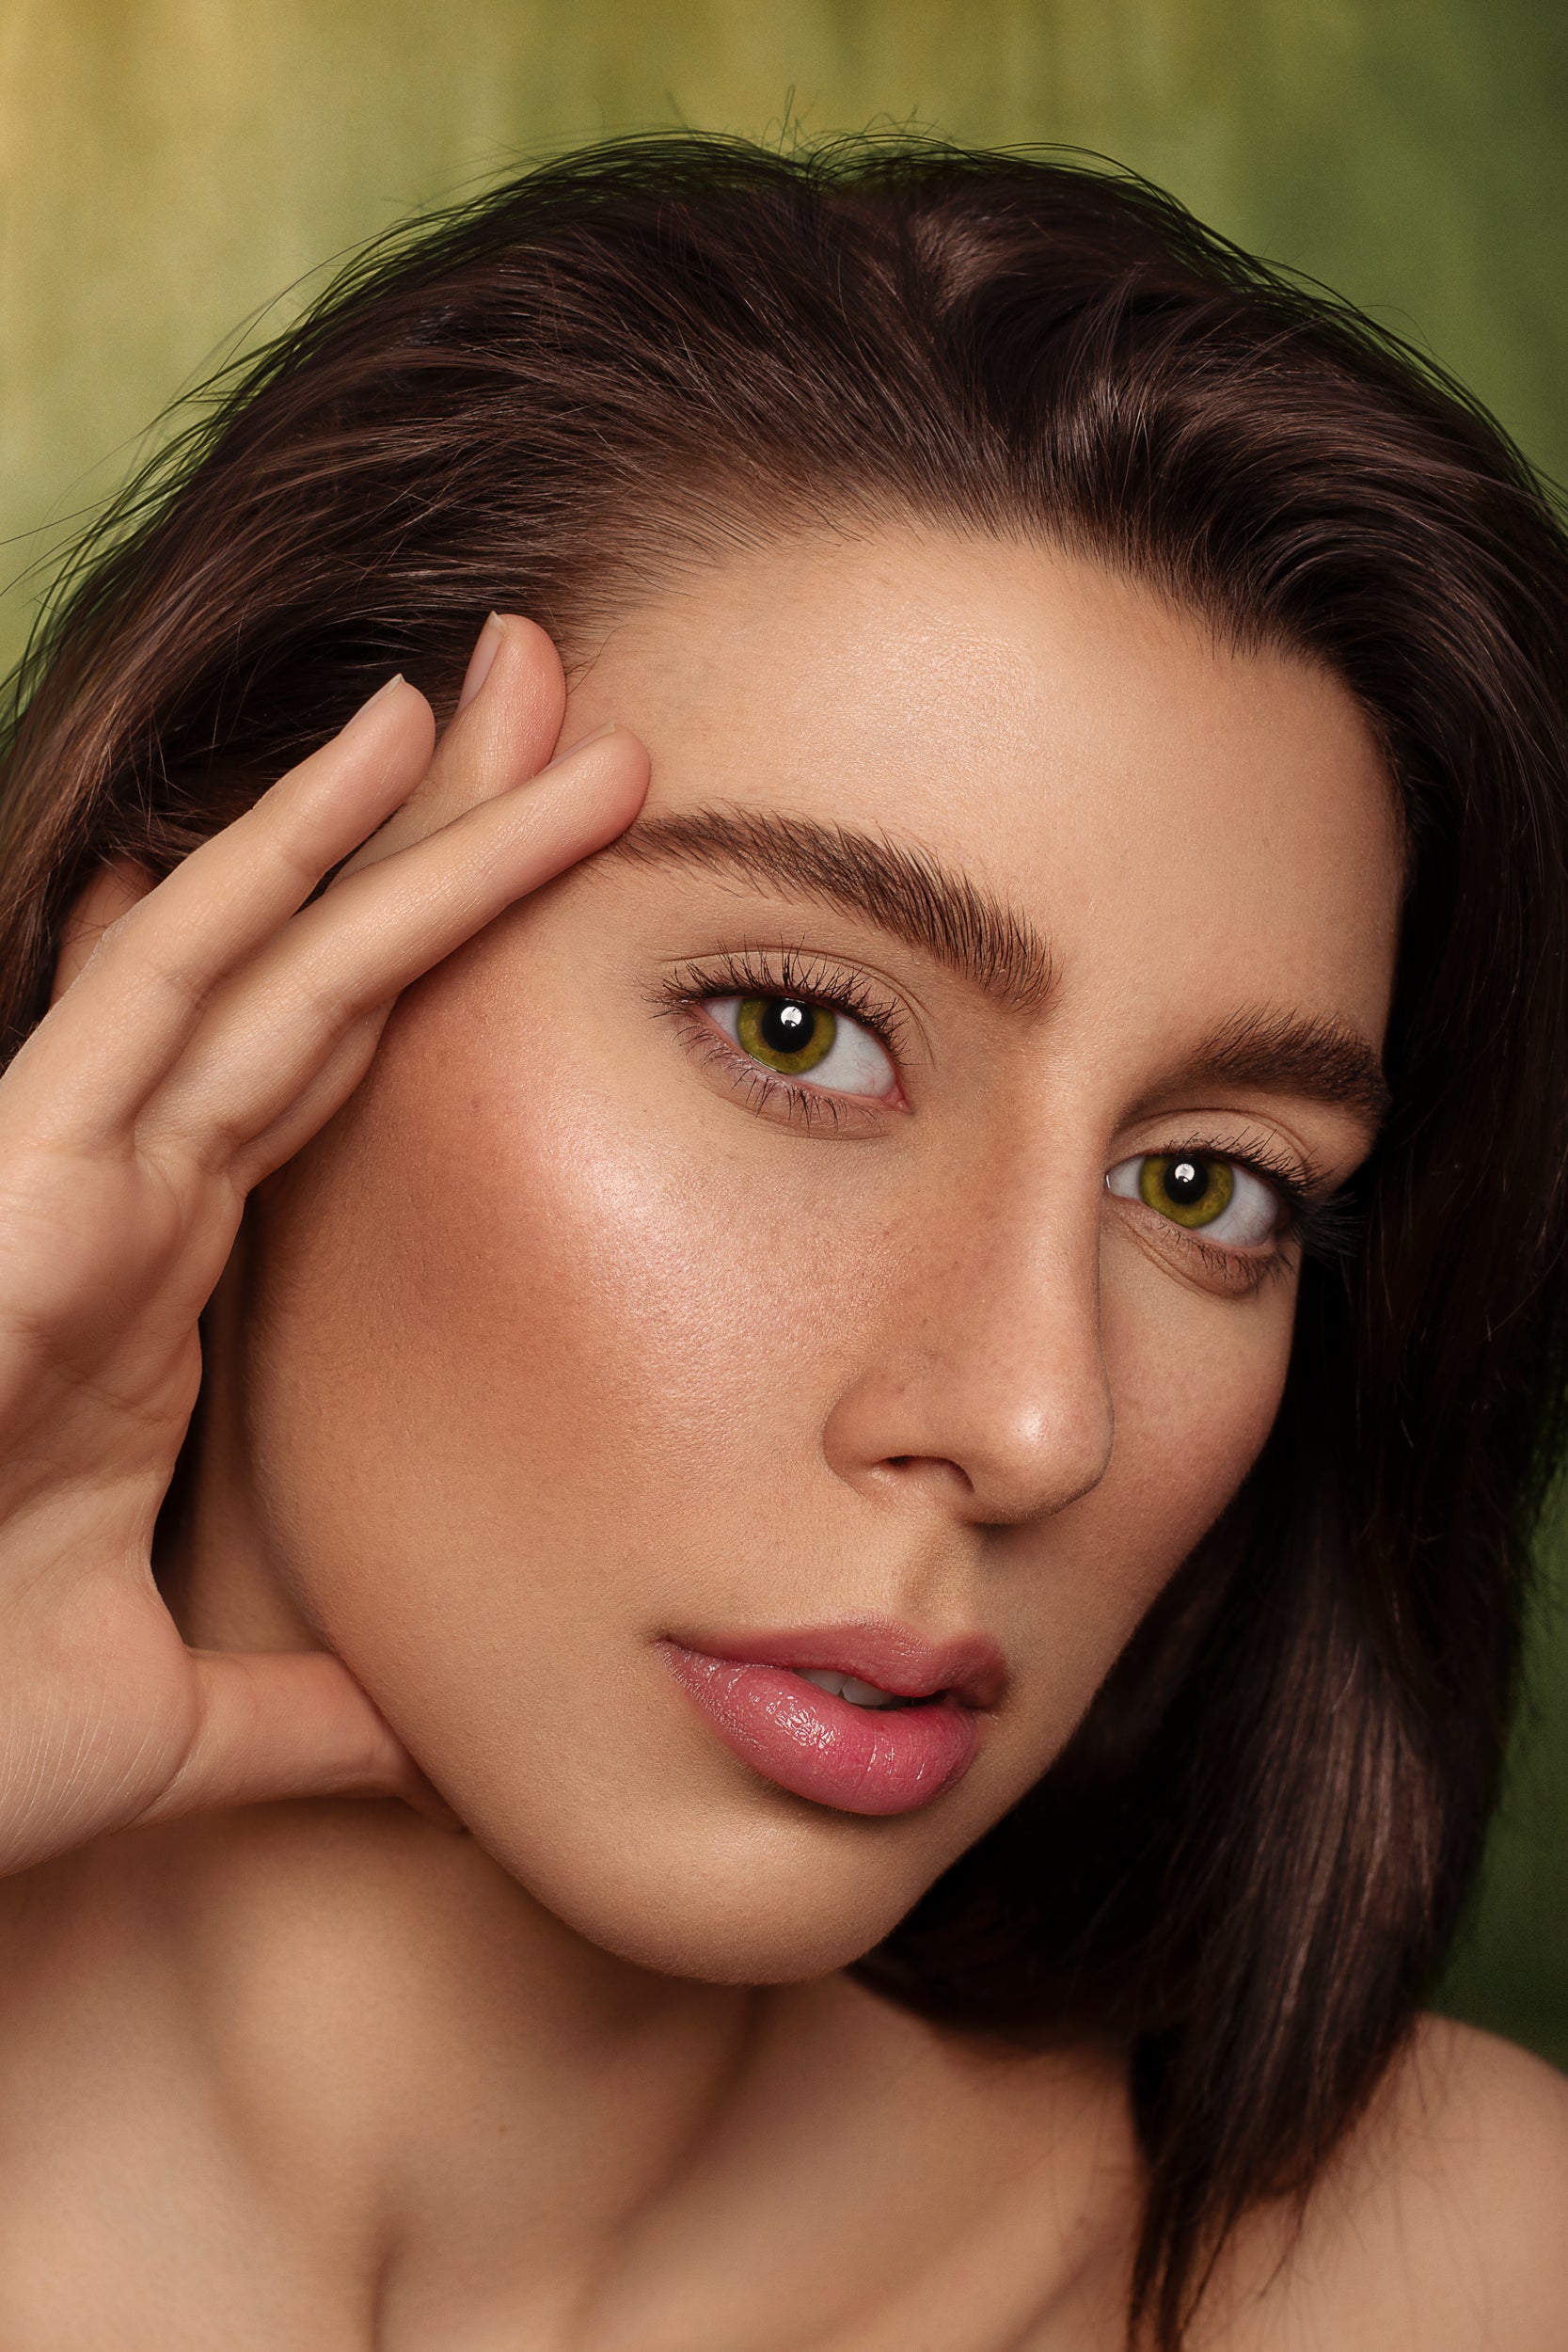 Close-up portrait of a young woman with brown hair and striking green eyes, lightly touching her face against the Kate Sweep Green Abstract Backdrop for Photography. Her makeup is subtle yet enhances her natural features.